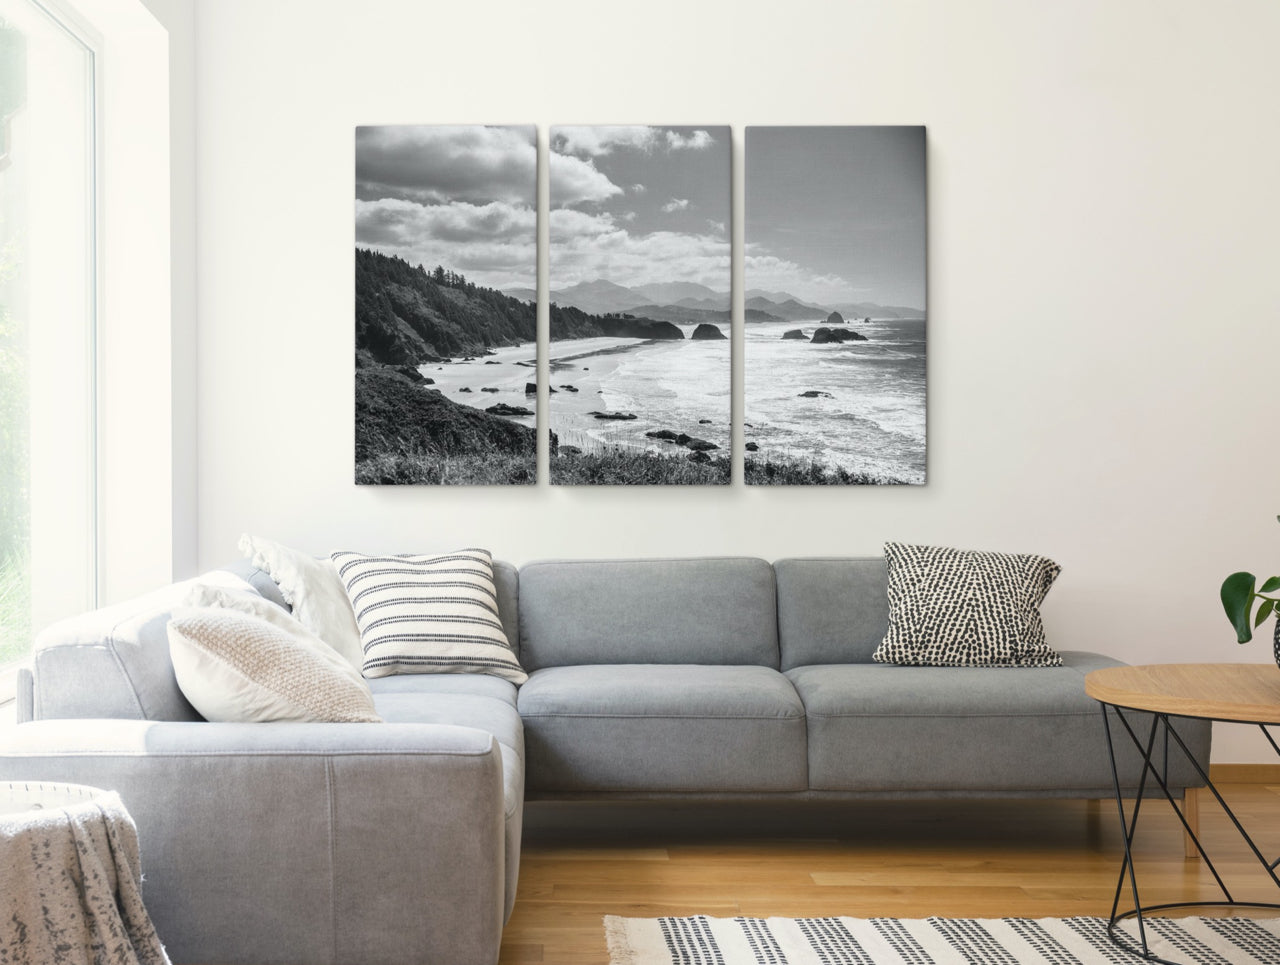 https://cdn.shopify.com/s/files/1/1144/9038/collections/Crescent-Beach-Black-and-White-Coastal-Modern-triptych.jpg?v=1642718151